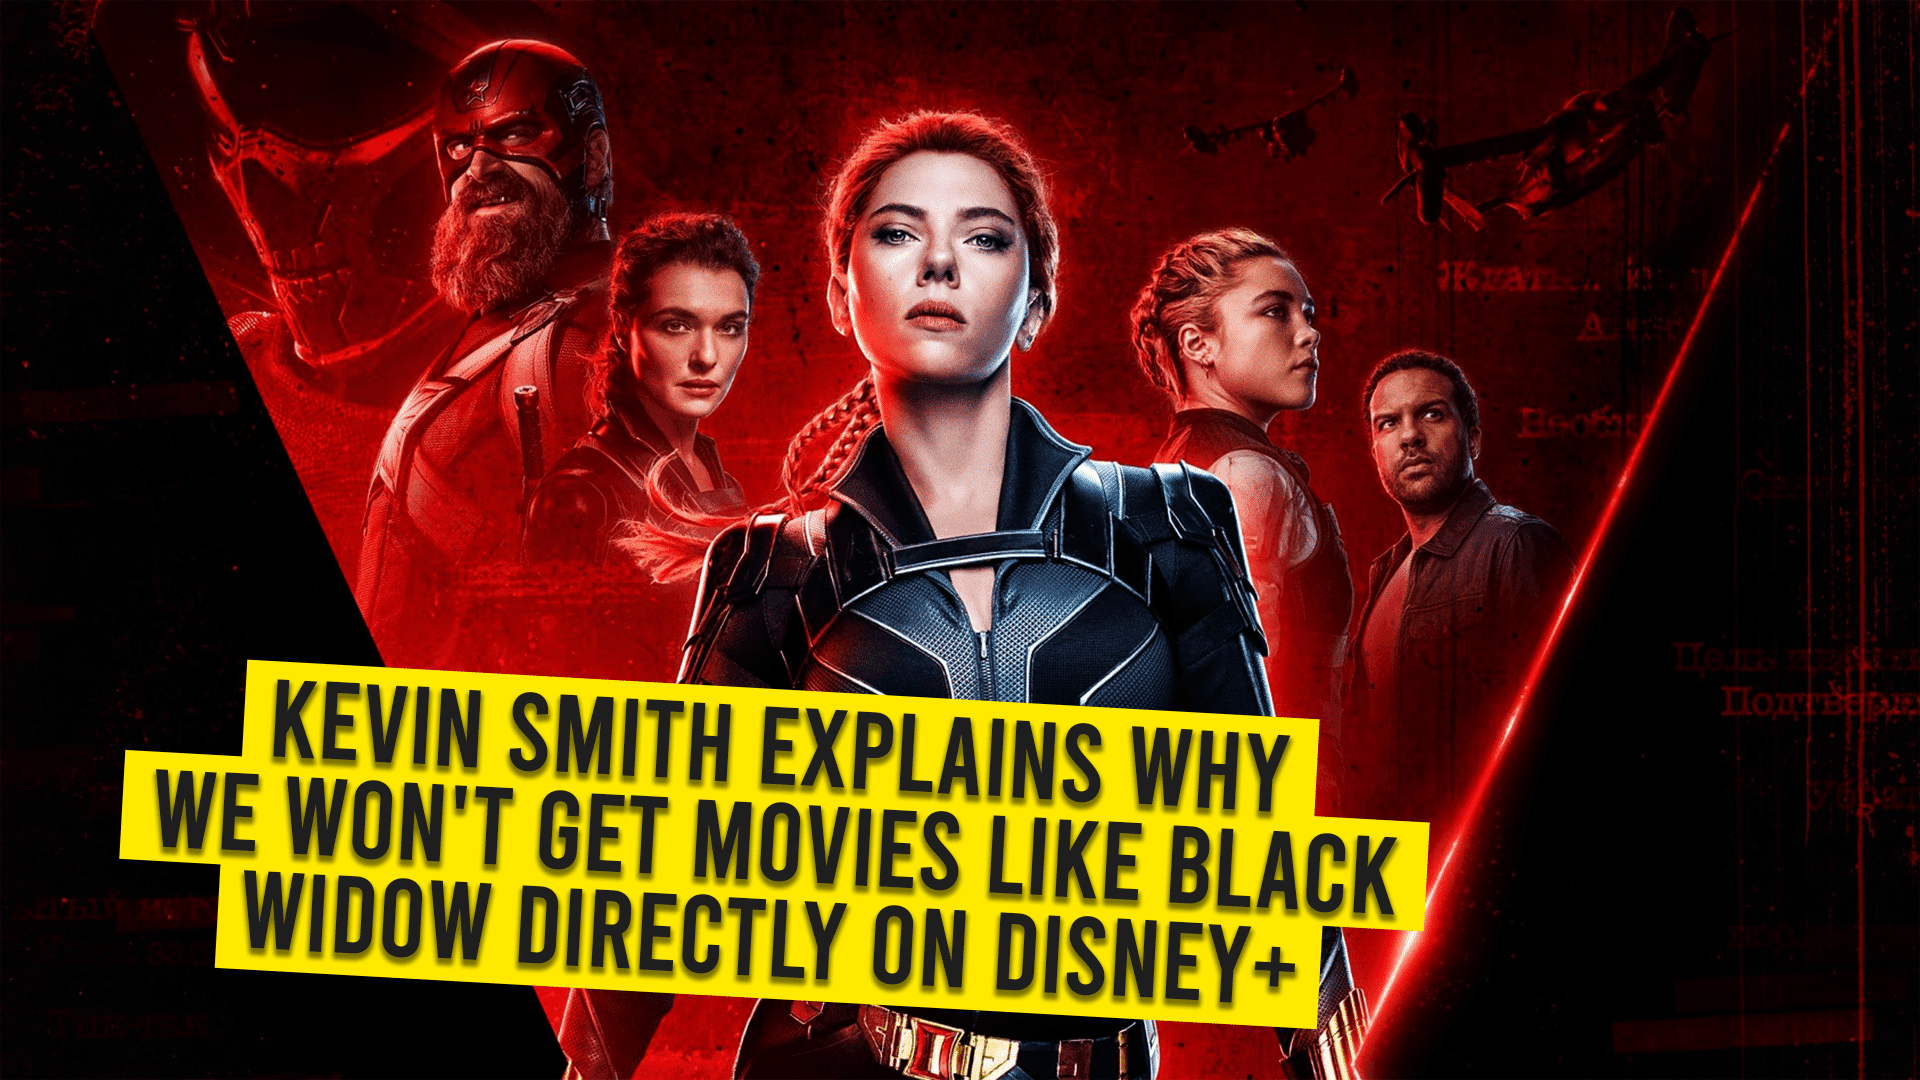 Kevin Smith Explains Why We Wont Get Movies Like Black Widow Directly On Disney+